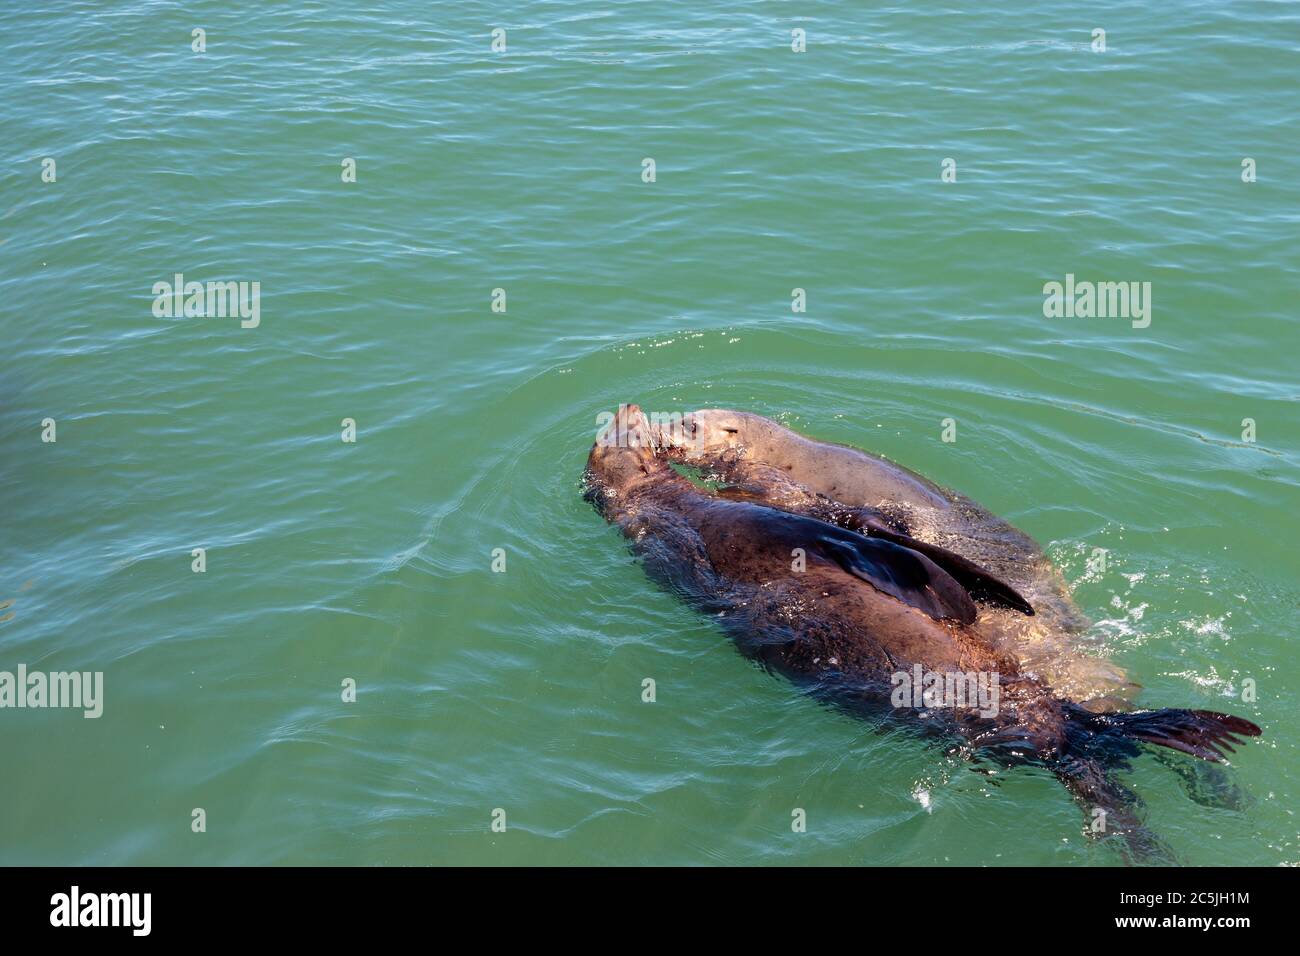 SAN FRANCISCO, CALIFORNIA, UNITED STATES - MAY 4, 2019: View of Sea Lions swimming off Pier 39 Stock Photo